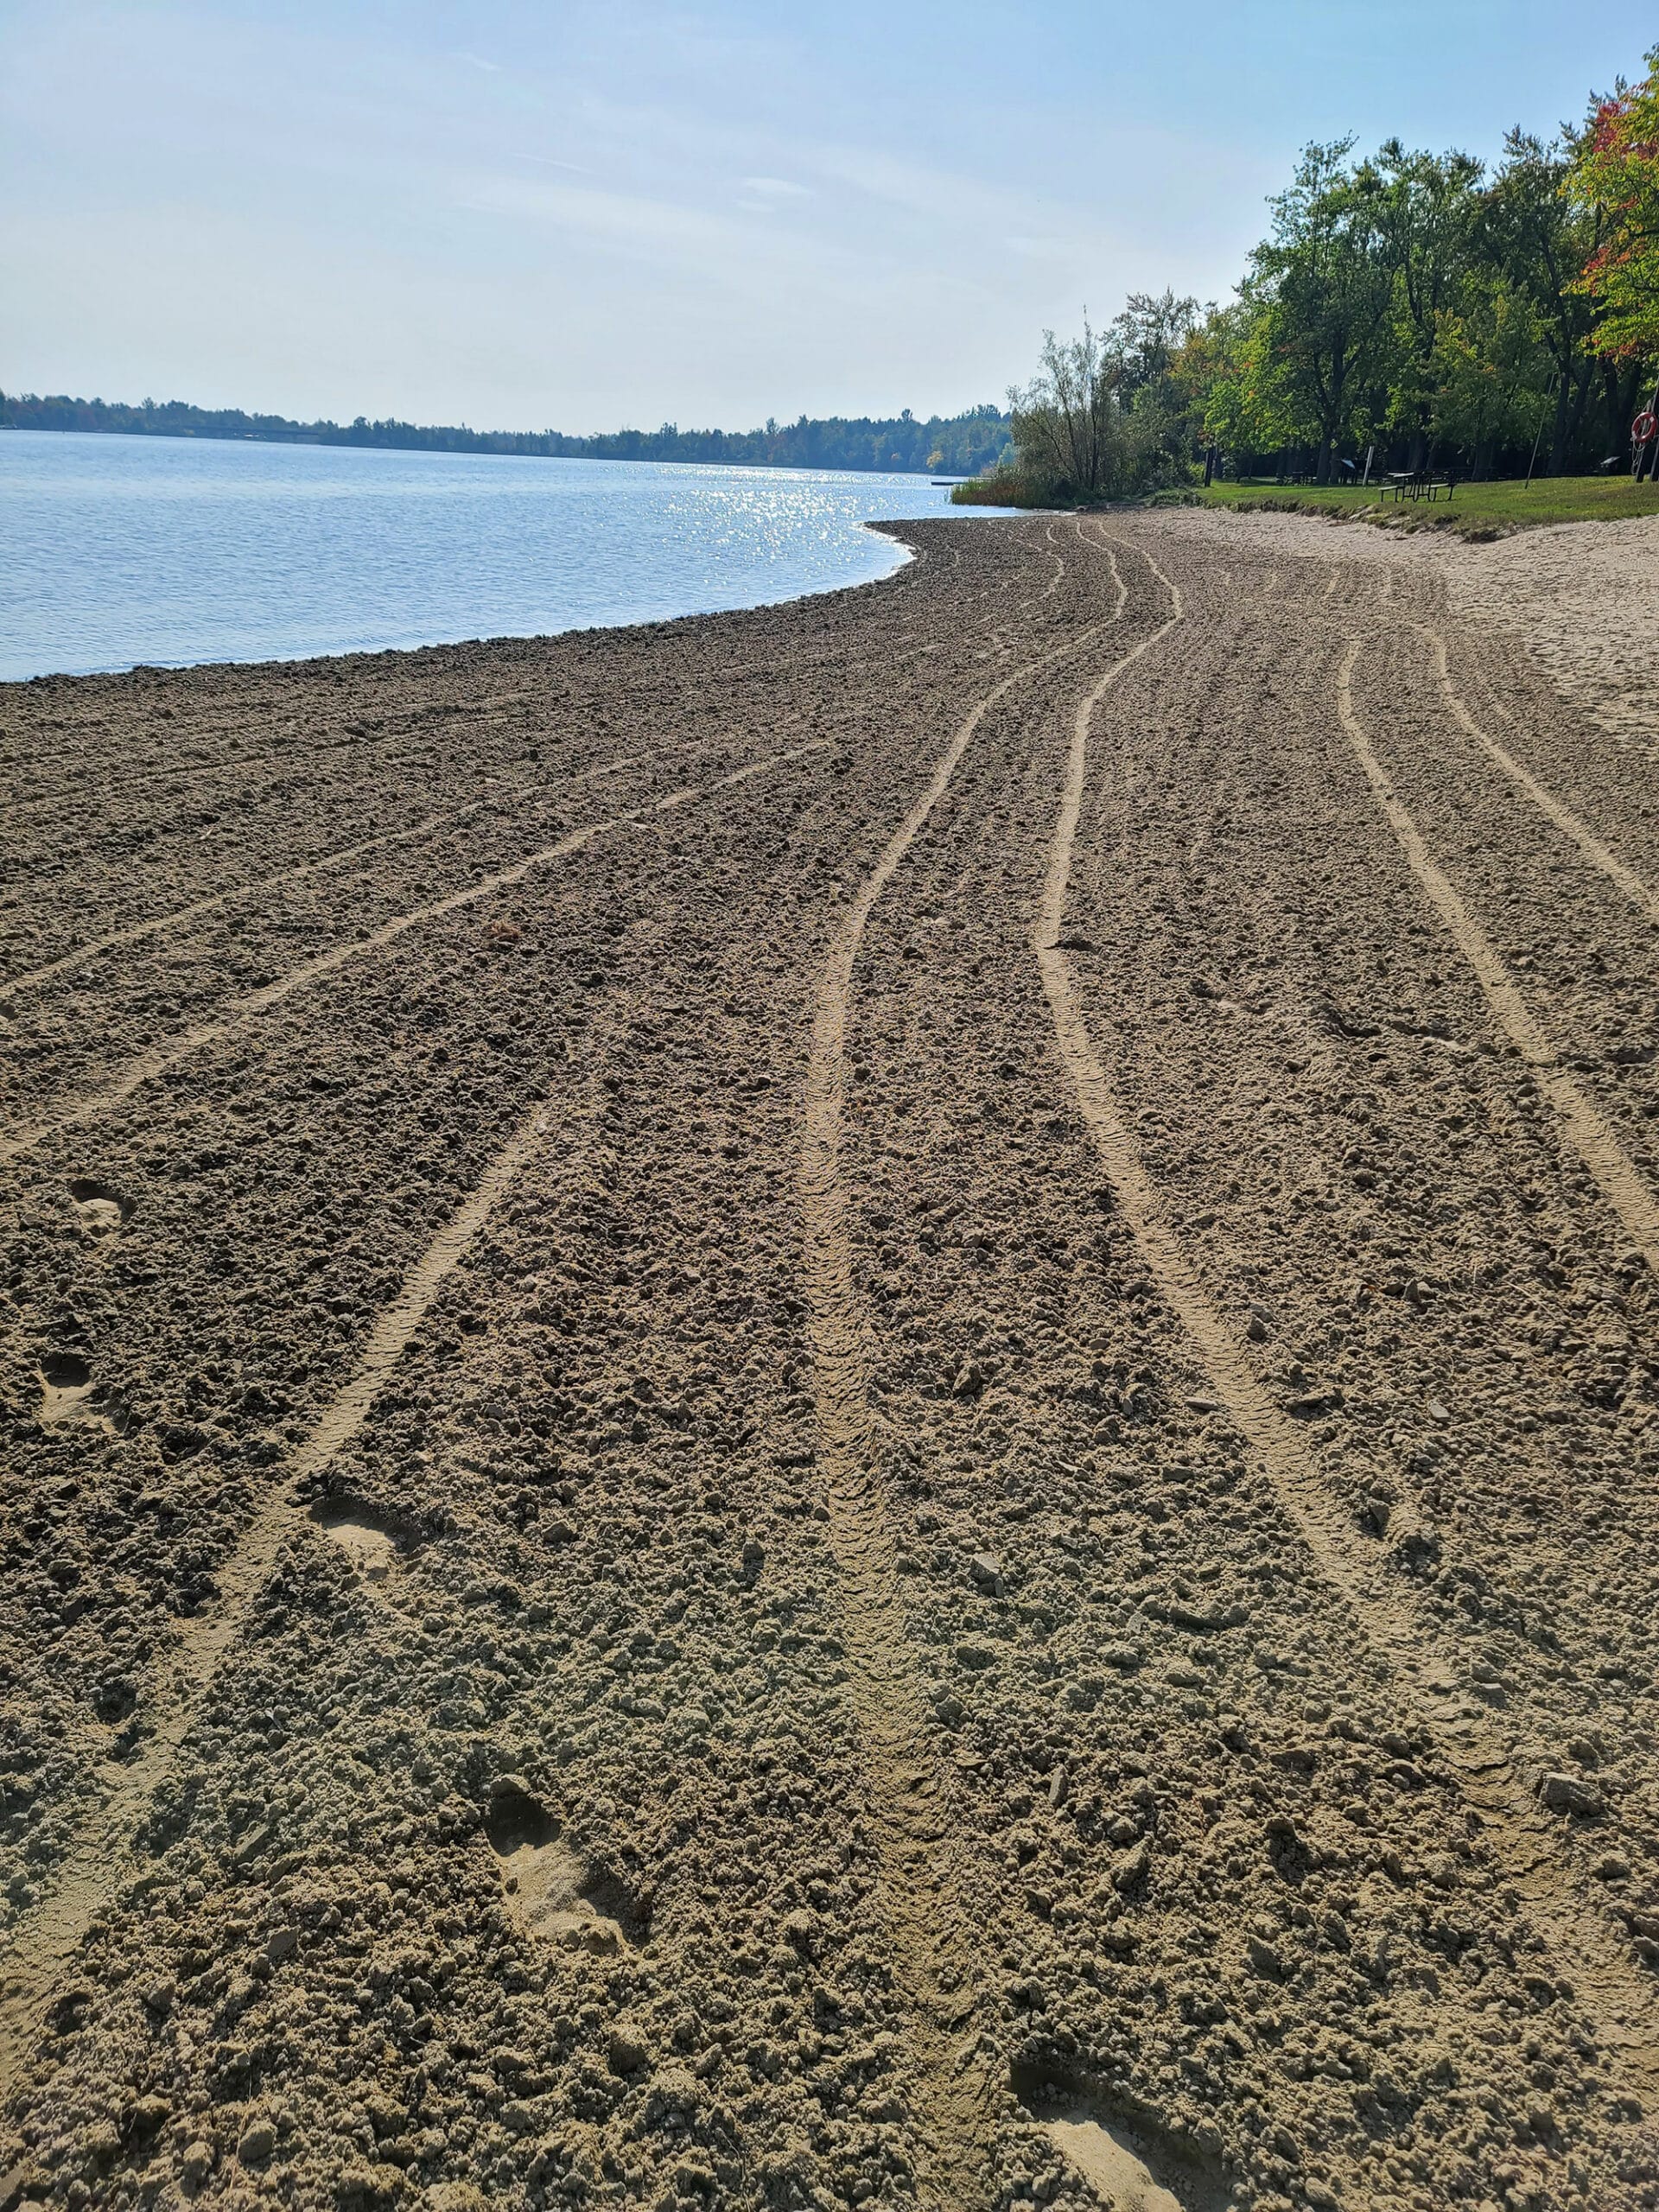 A large sand beach on the Rideau River.